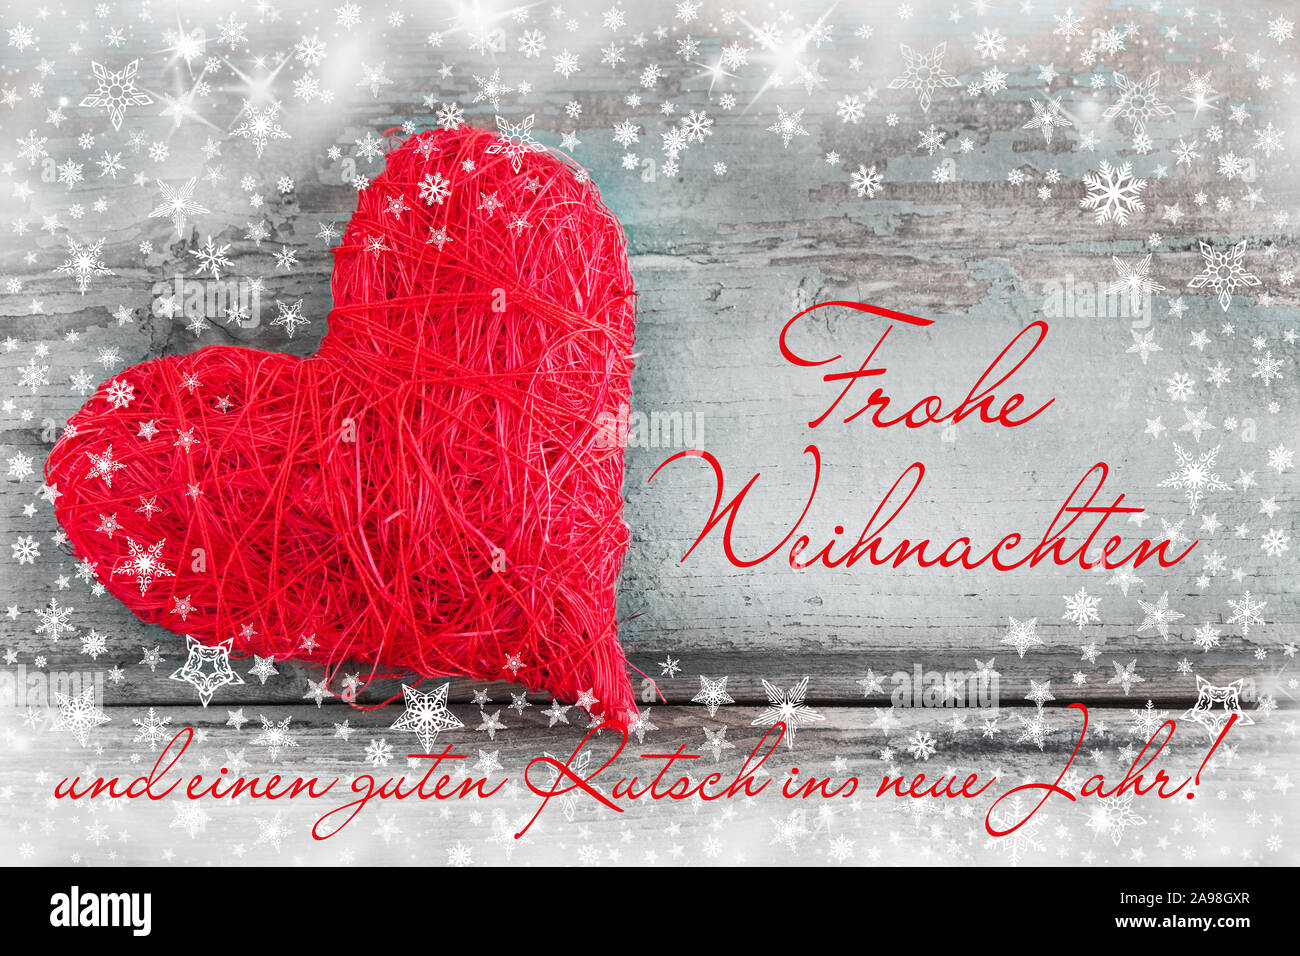 Frohe Weihnachten  Merry Christmas and a Happy New Year Stock Photo